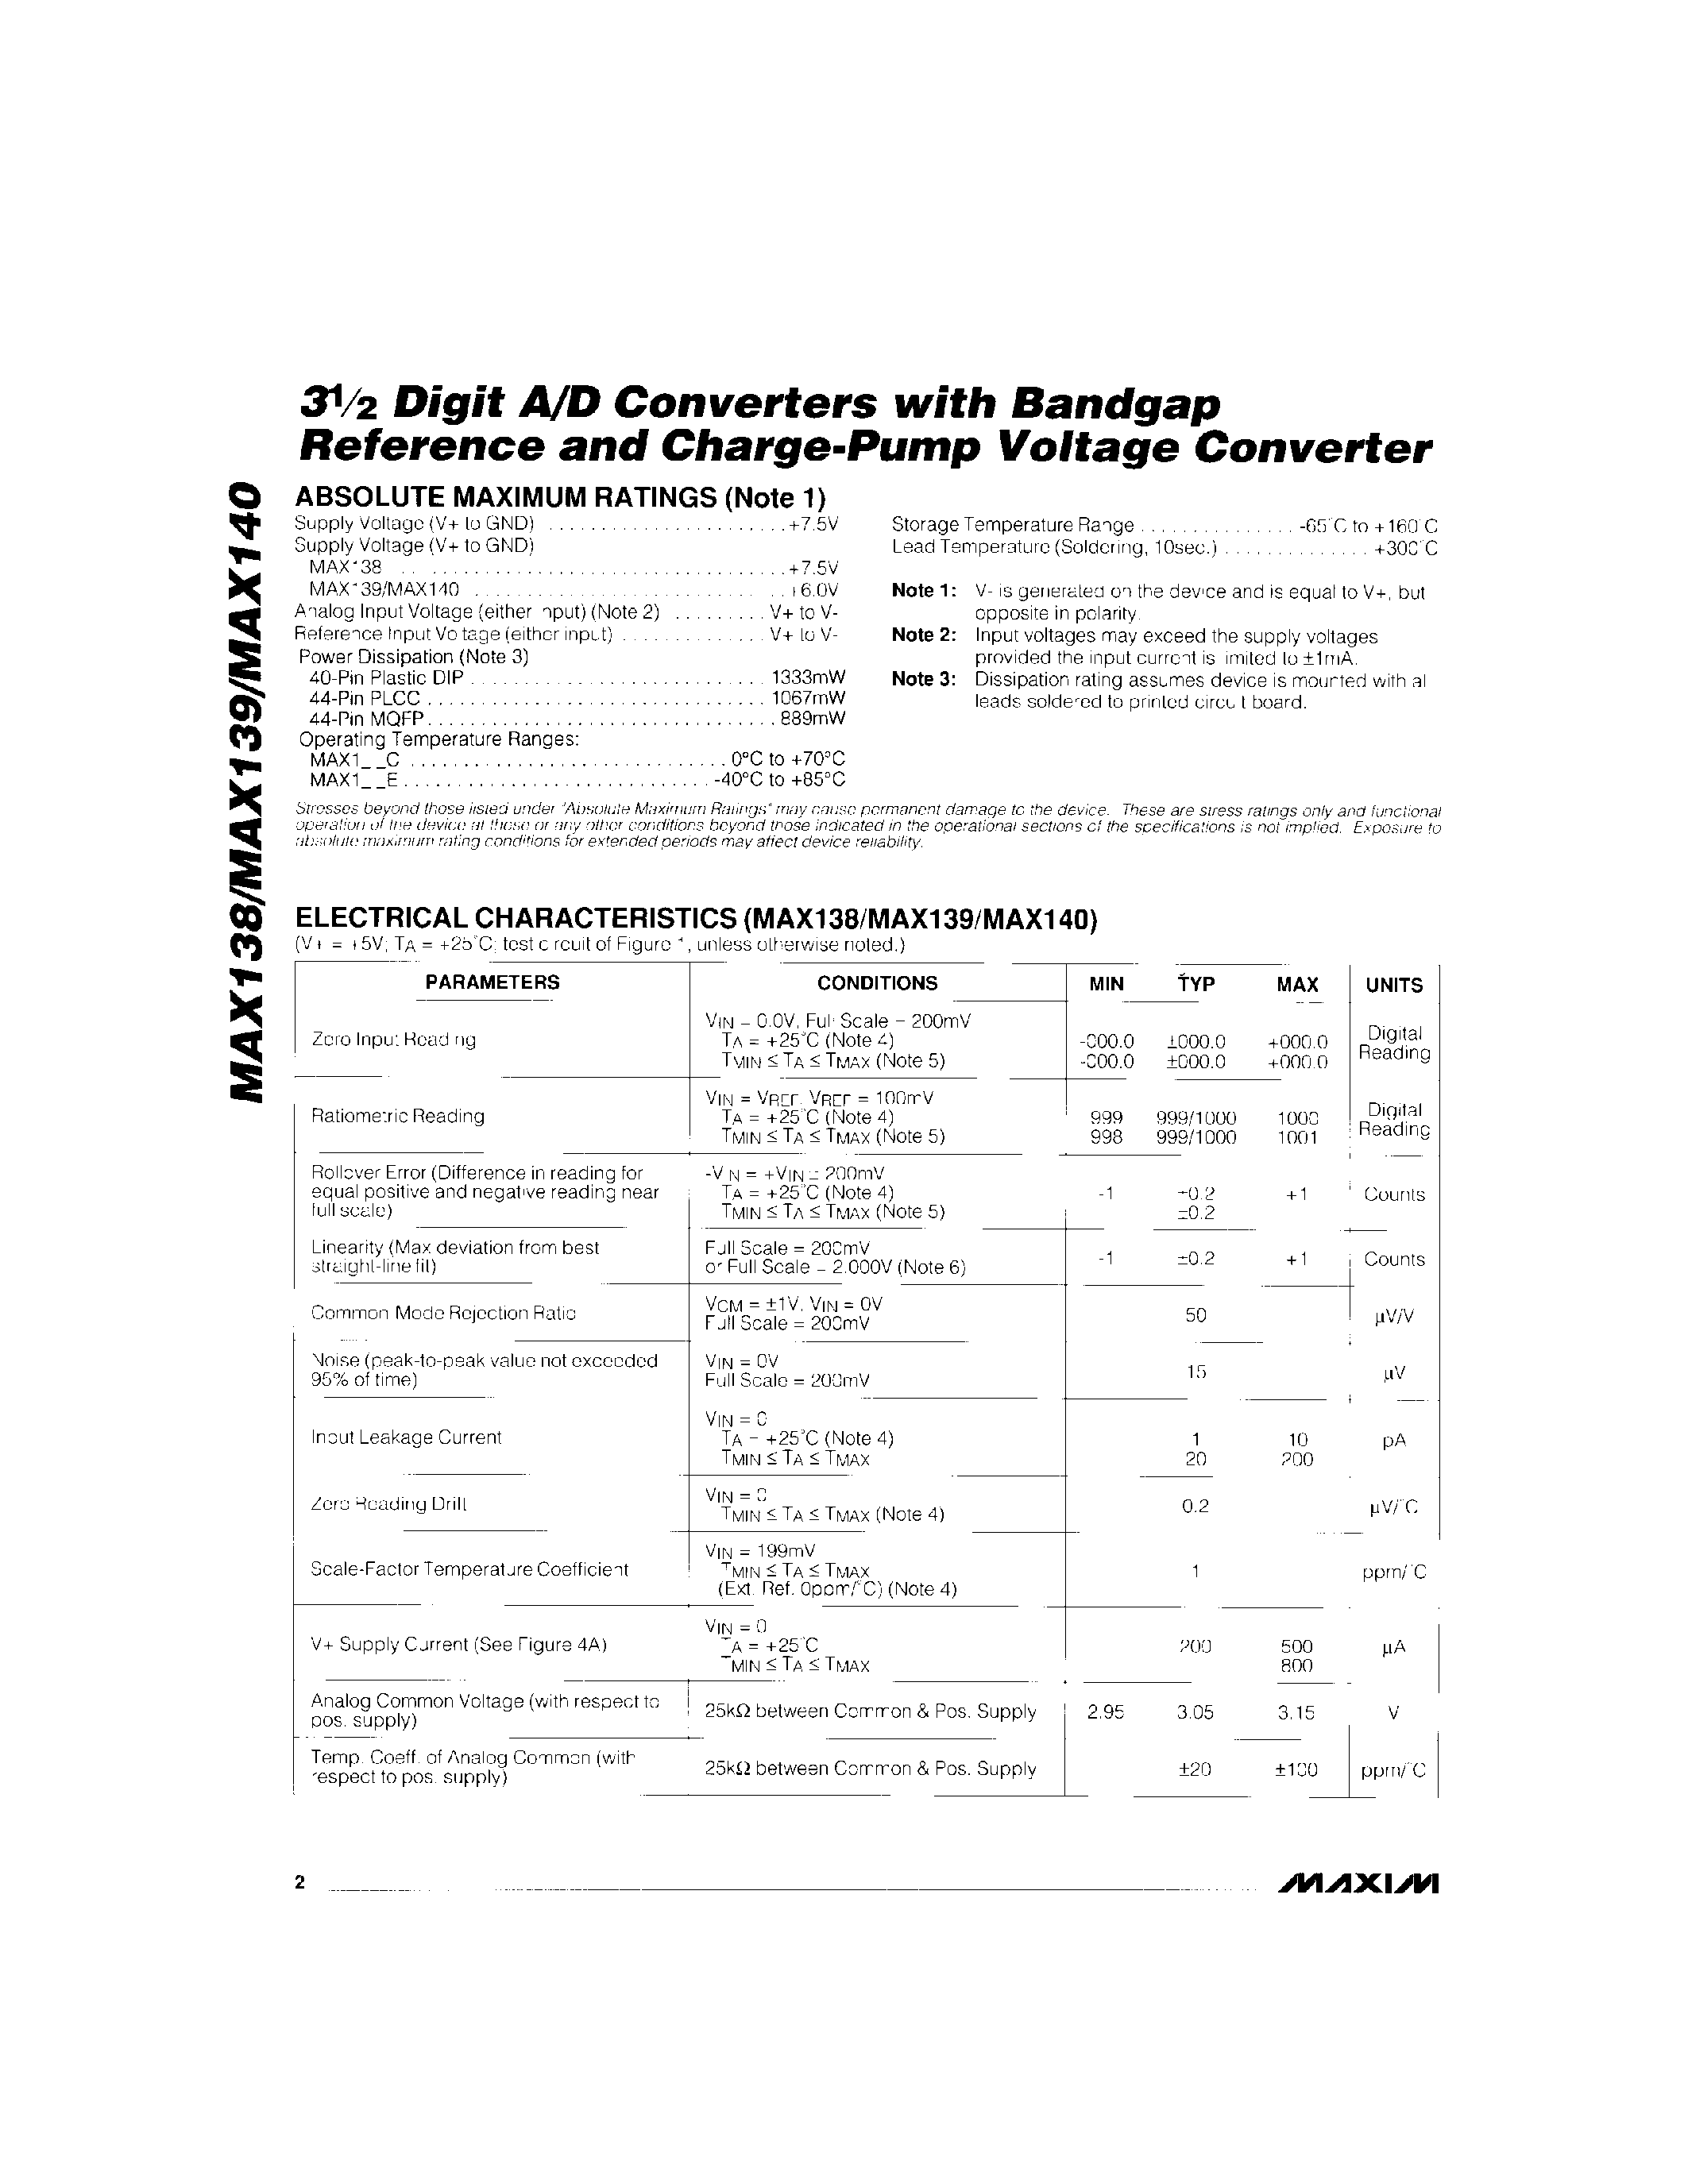 Datasheet MAX138C/D - 3Digit A/D Converters with Bandgap Refrence and Charge-Pump Voltage Converter page 2